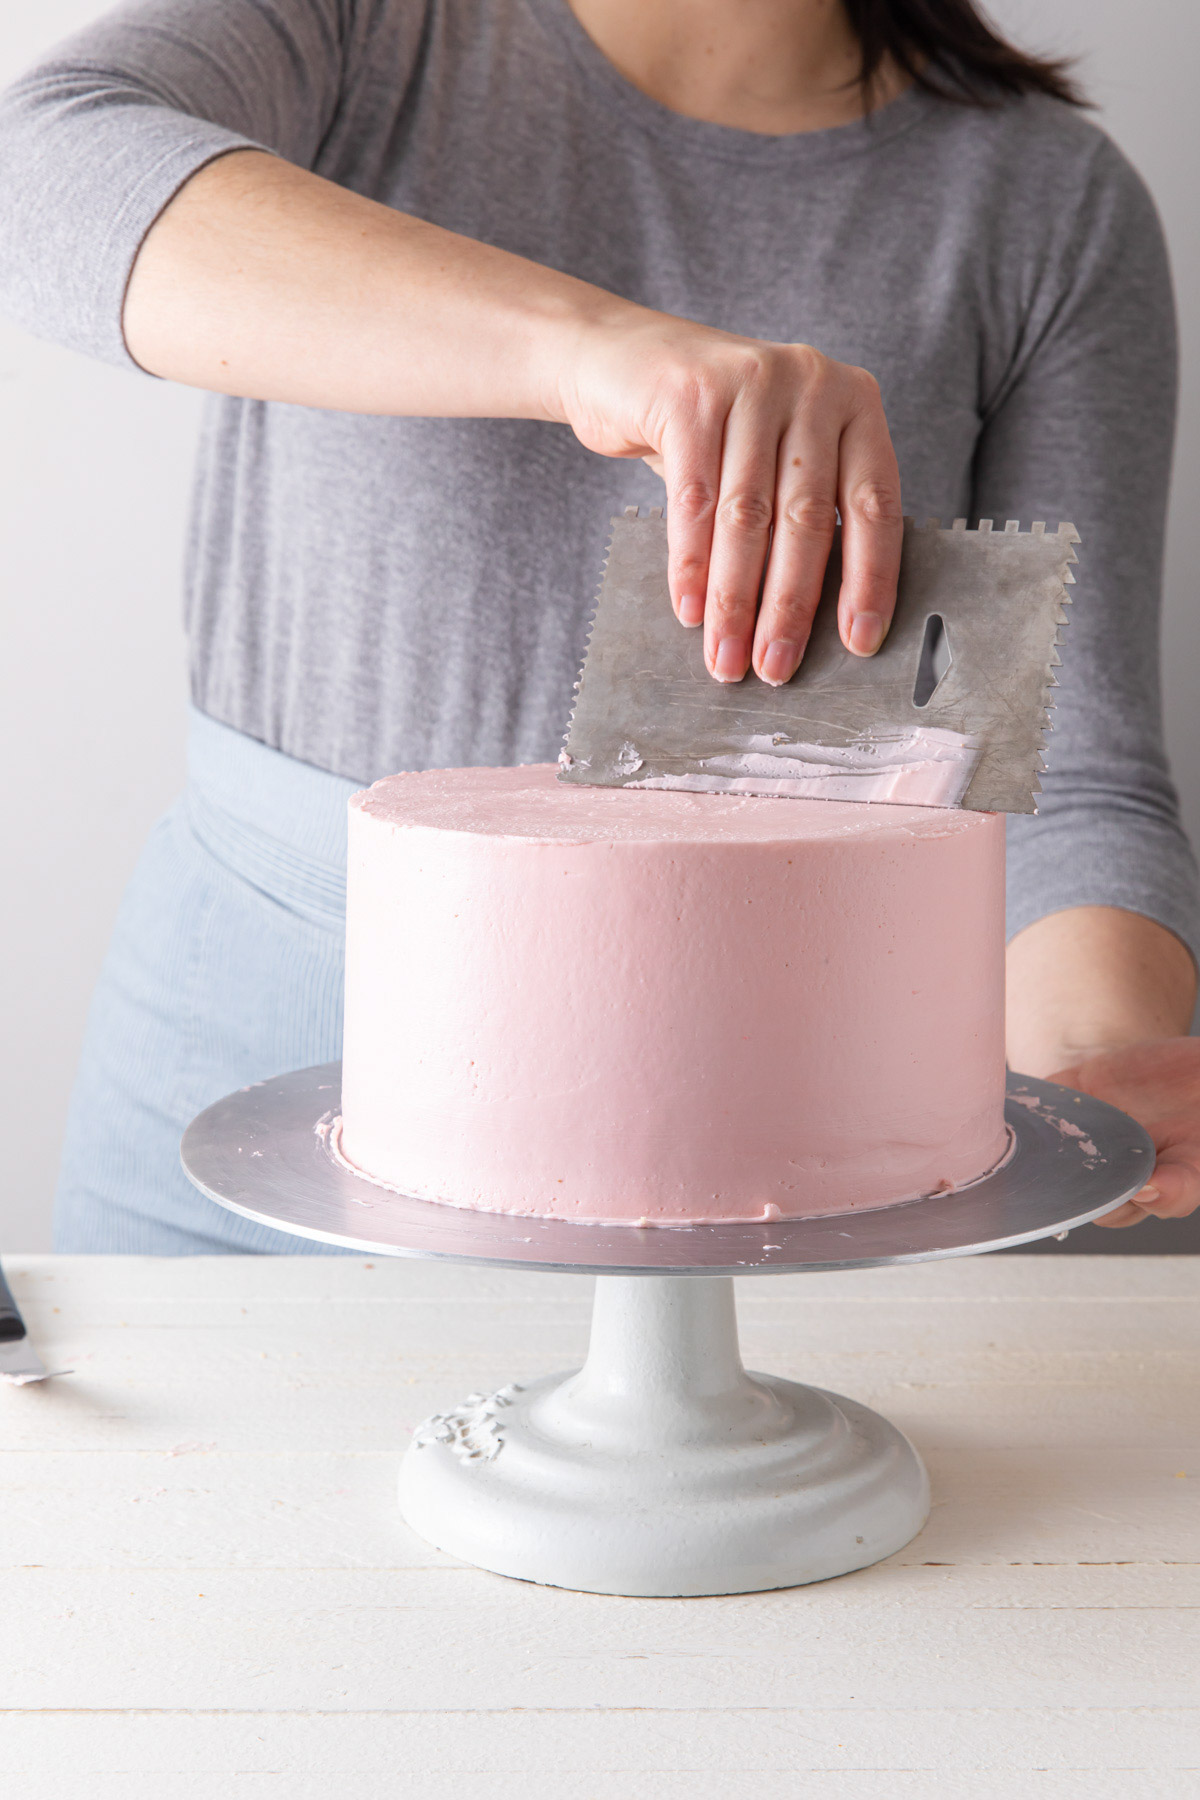 Smothing out the top of a frosted cake with an icing smoother